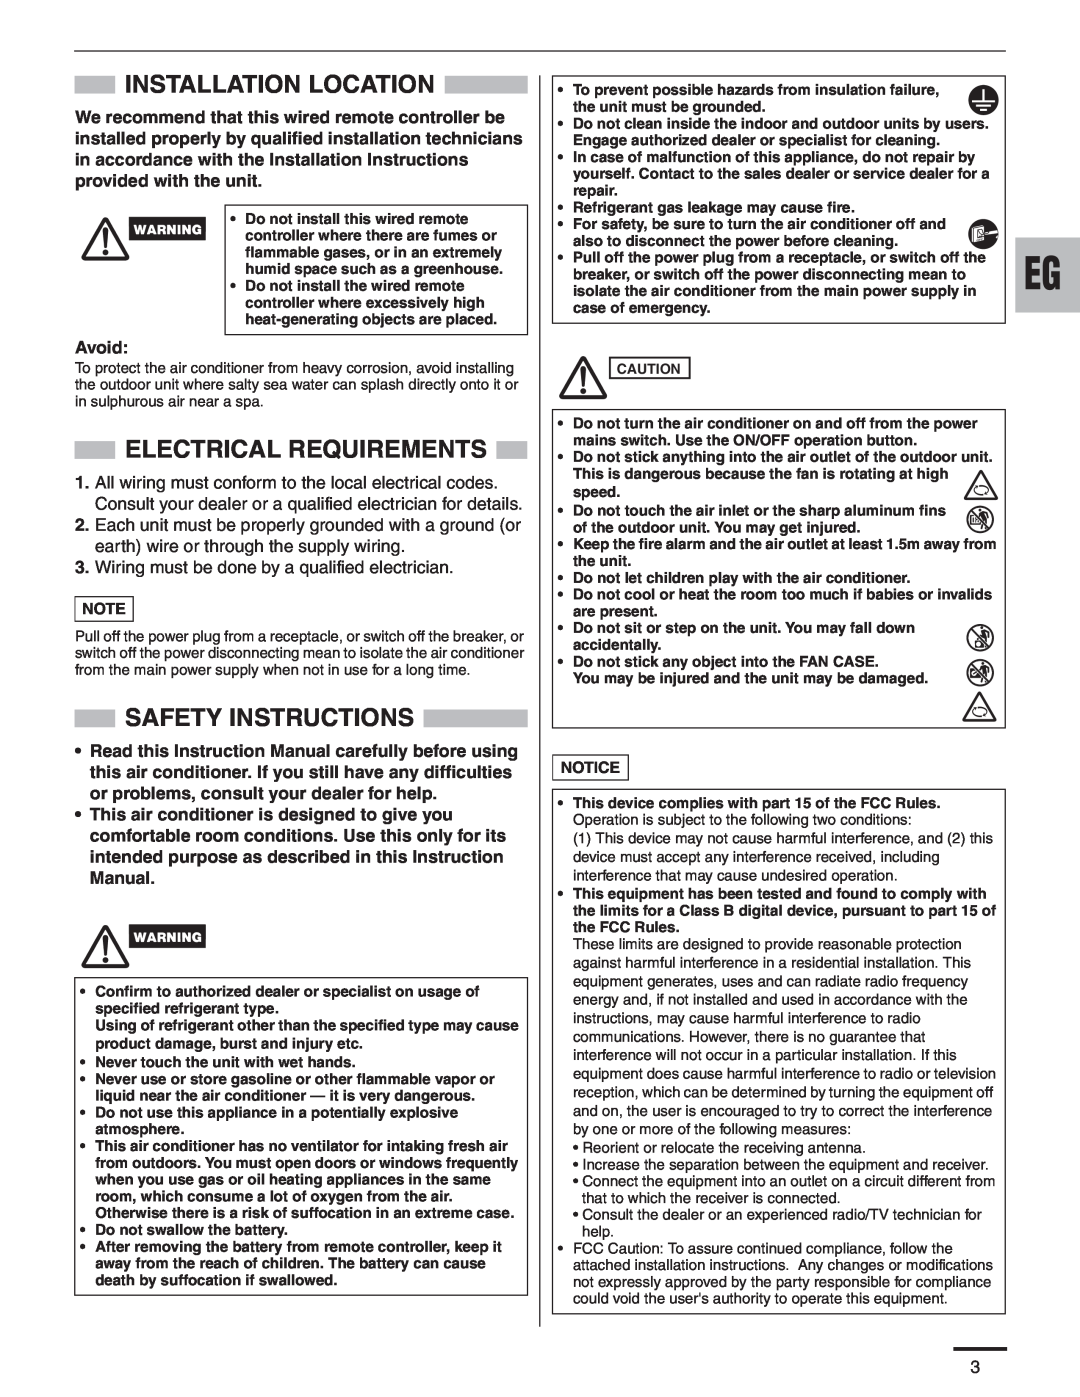 Panasonic R410A service manual Installation Location, Electrical Requirements, Safety Instructions, Avoid 